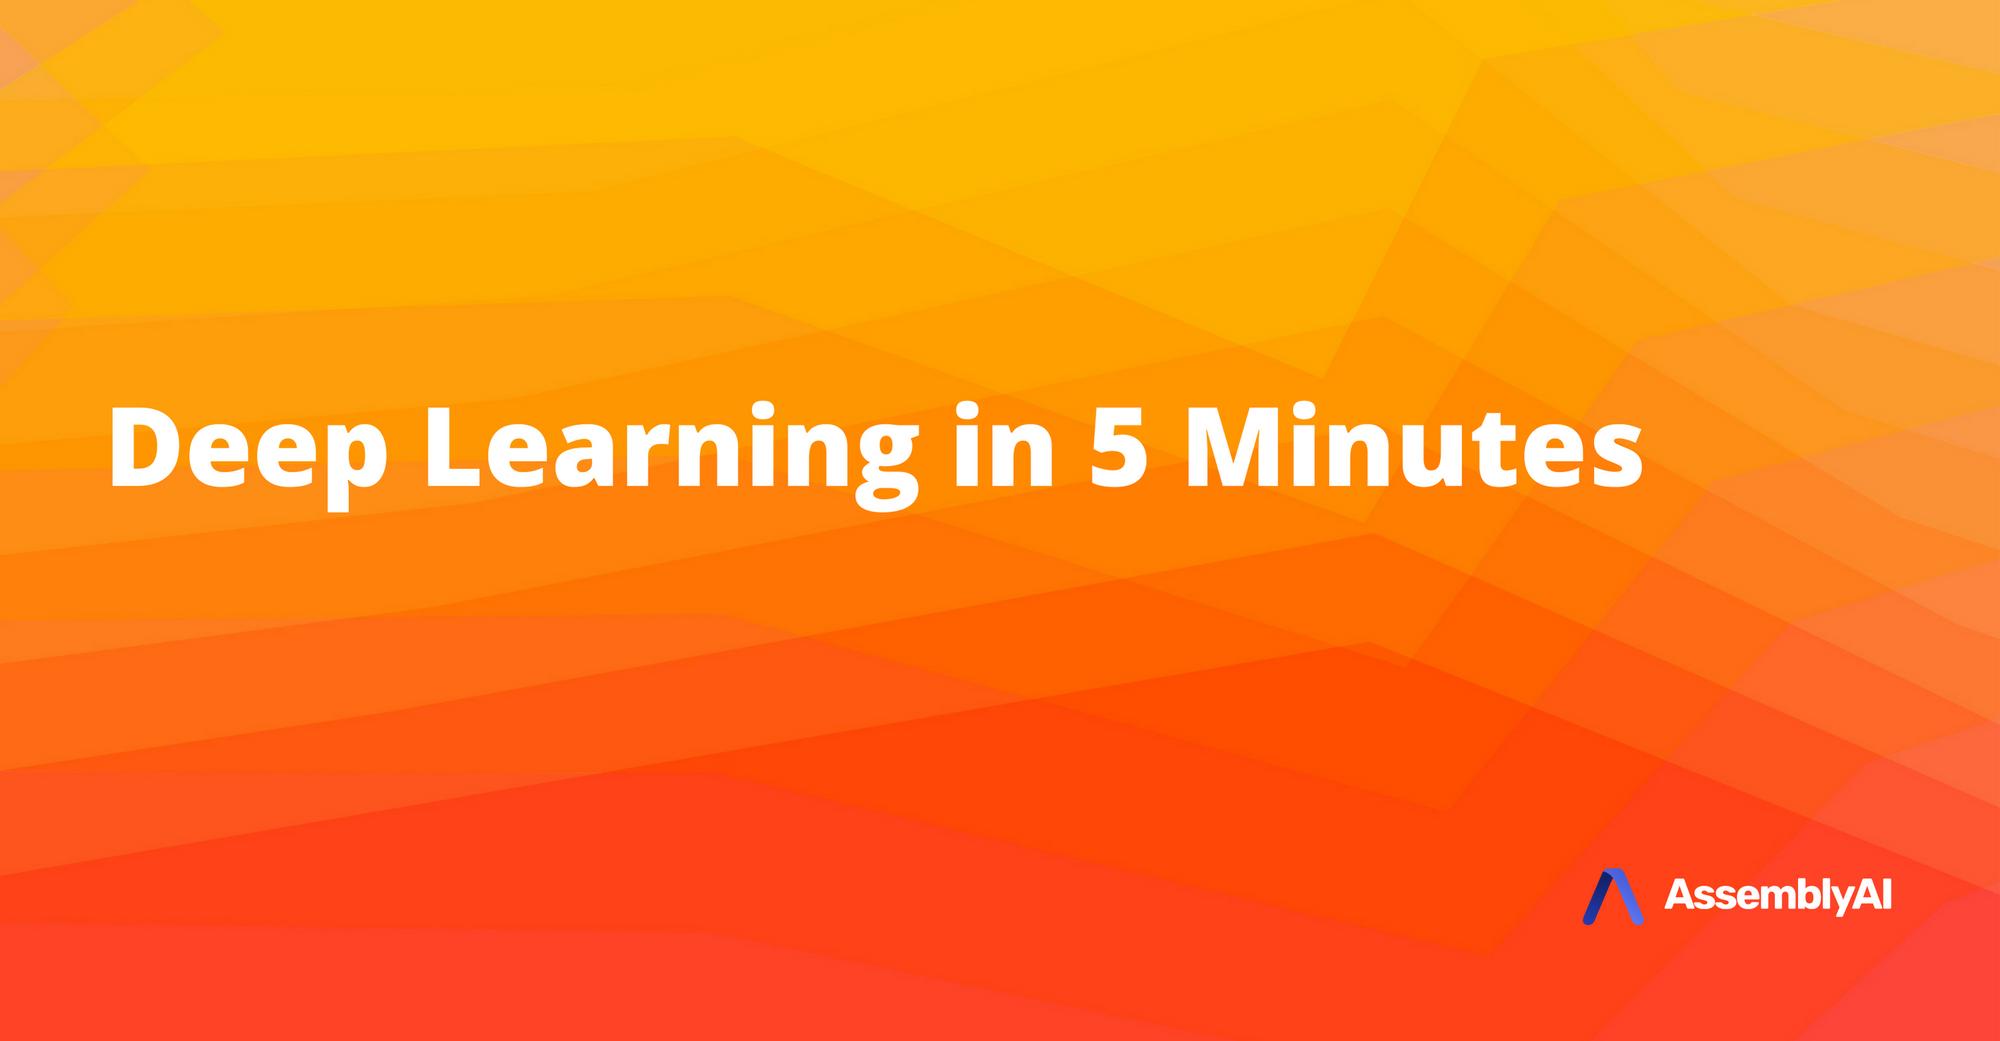 Deep Learning in 5 Minutes